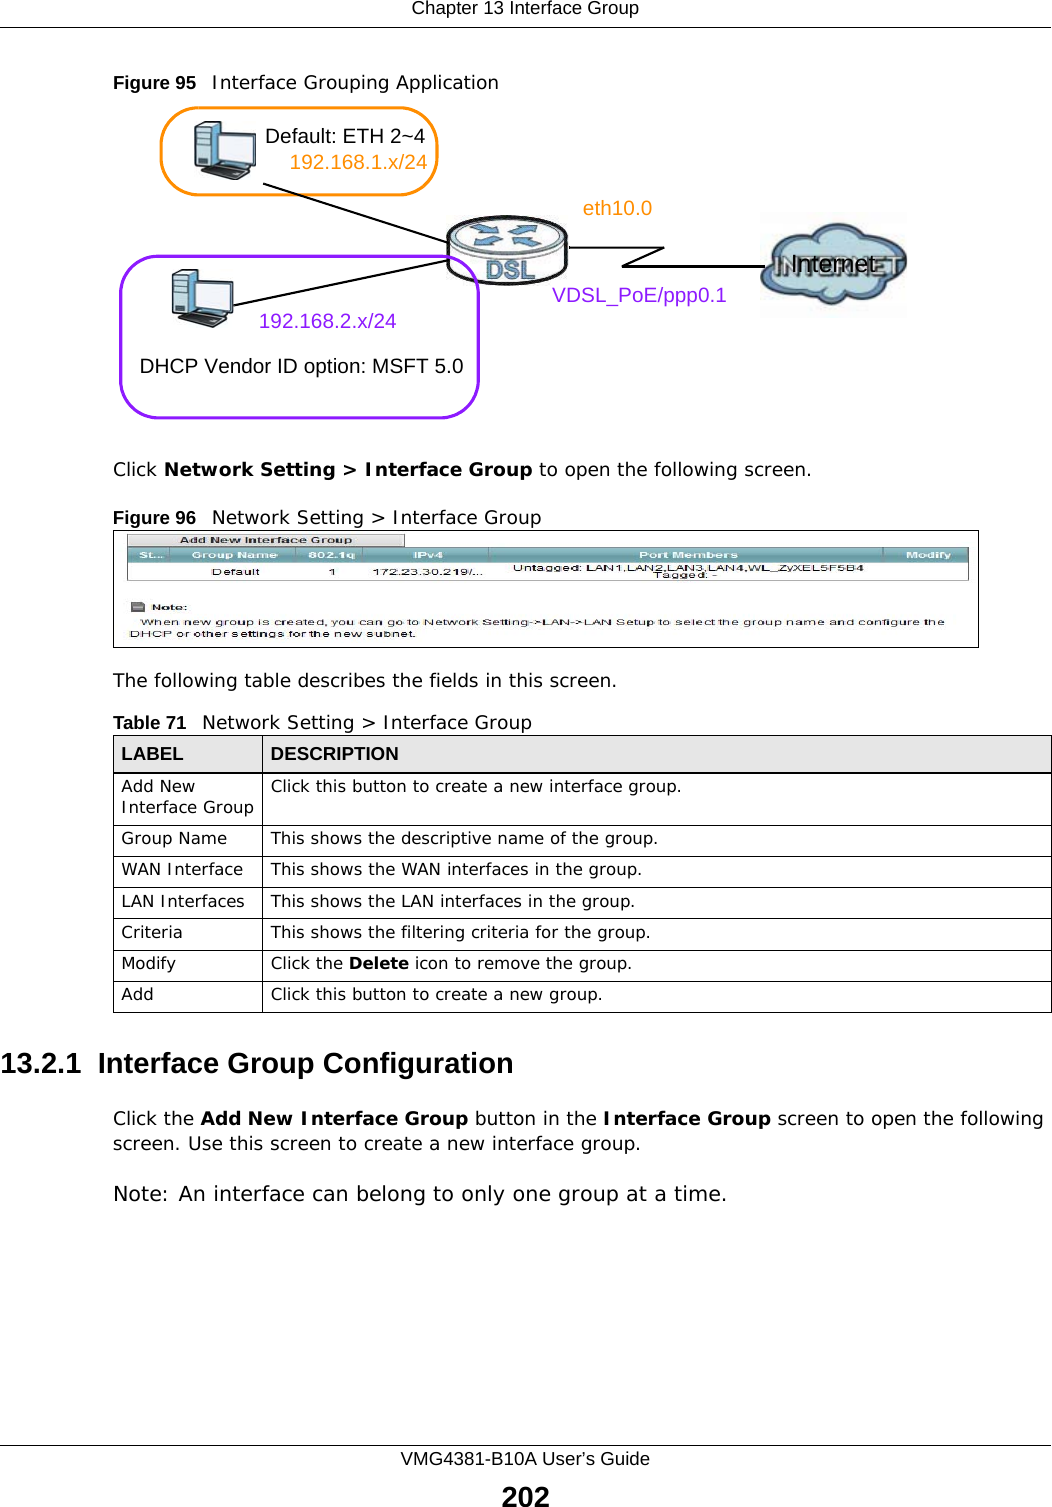 Chapter 13 Interface GroupVMG4381-B10A User’s Guide202Figure 95   Interface Grouping ApplicationClick Network Setting &gt; Interface Group to open the following screen. Figure 96   Network Setting &gt; Interface Group The following table describes the fields in this screen. 13.2.1  Interface Group ConfigurationClick the Add New Interface Group button in the Interface Group screen to open the following screen. Use this screen to create a new interface group. Note: An interface can belong to only one group at a time.Table 71   Network Setting &gt; Interface GroupLABEL DESCRIPTIONAdd New Interface Group Click this button to create a new interface group.Group Name This shows the descriptive name of the group.WAN Interface This shows the WAN interfaces in the group.LAN Interfaces This shows the LAN interfaces in the group.Criteria This shows the filtering criteria for the group.Modify Click the Delete icon to remove the group.Add Click this button to create a new group.Default: ETH 2~4Internet192.168.1.x/24192.168.2.x/24VDSL_PoE/ppp0.1eth10.0DHCP Vendor ID option: MSFT 5.0